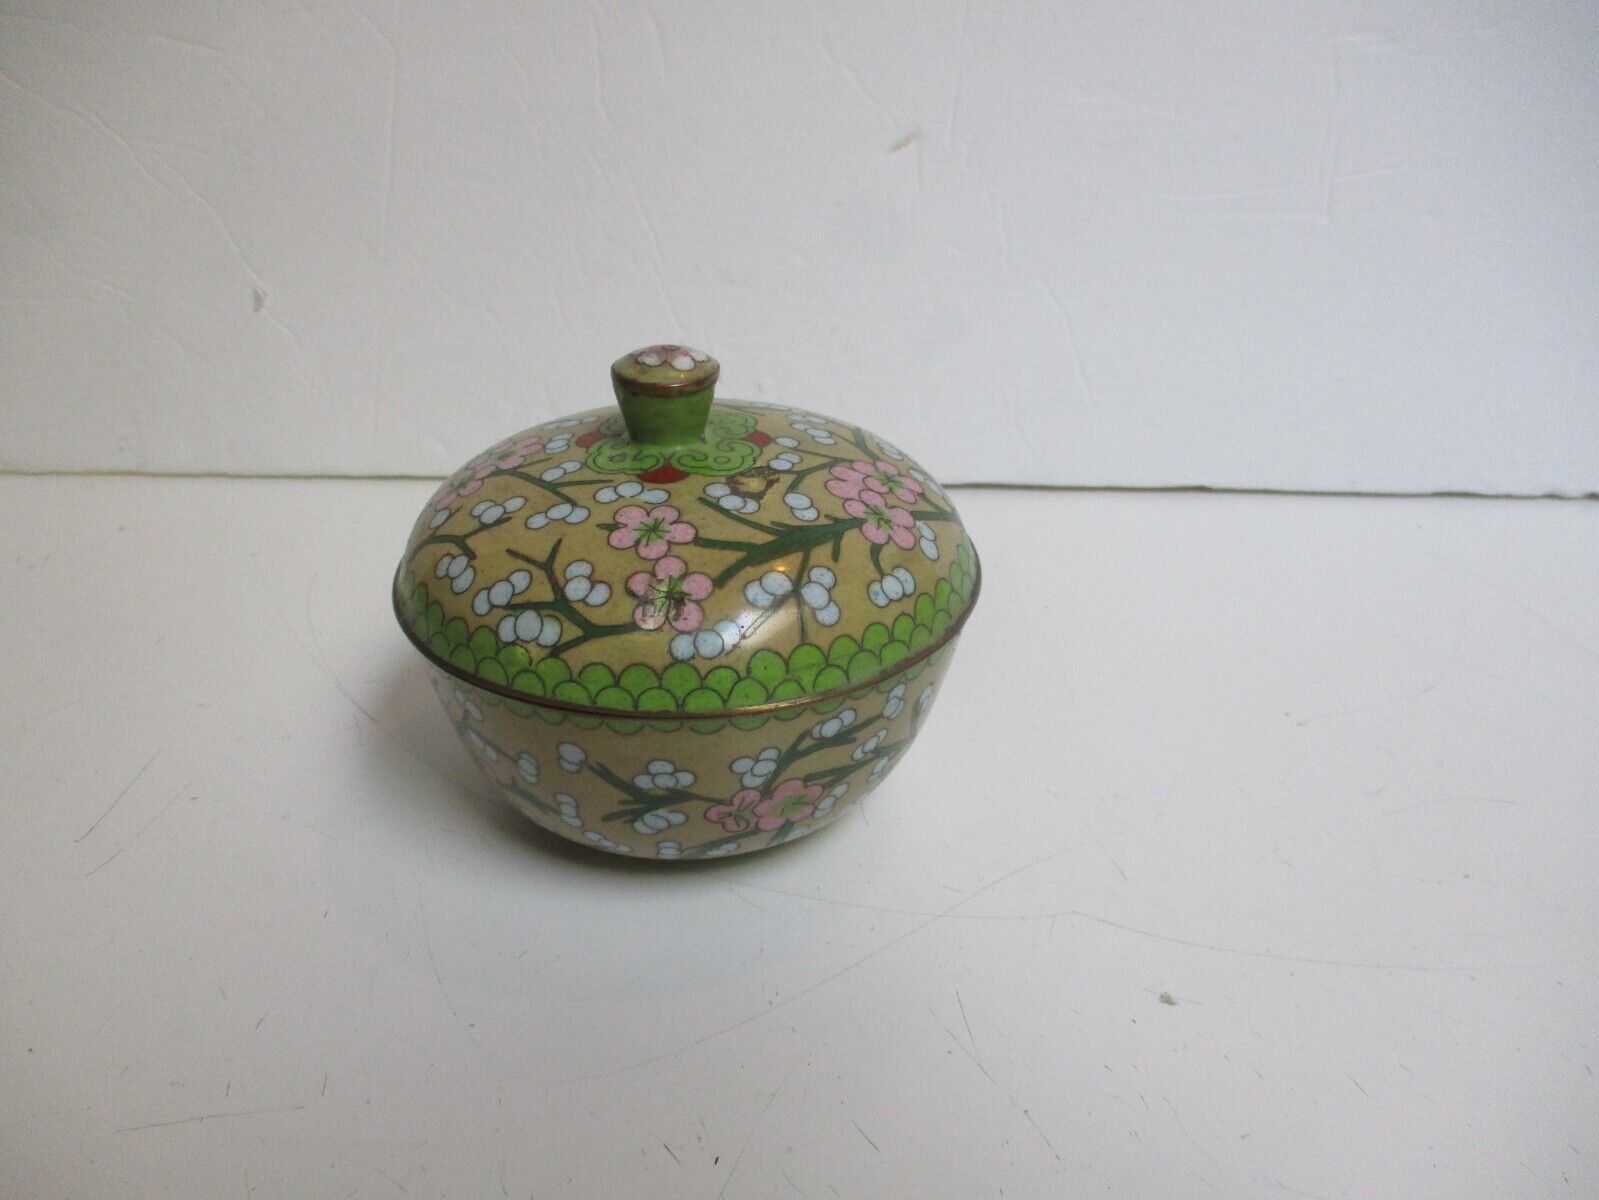 Antique Cloisonne Imperial Green Yellow Floral Candy Dish Trinket Jar Chinese